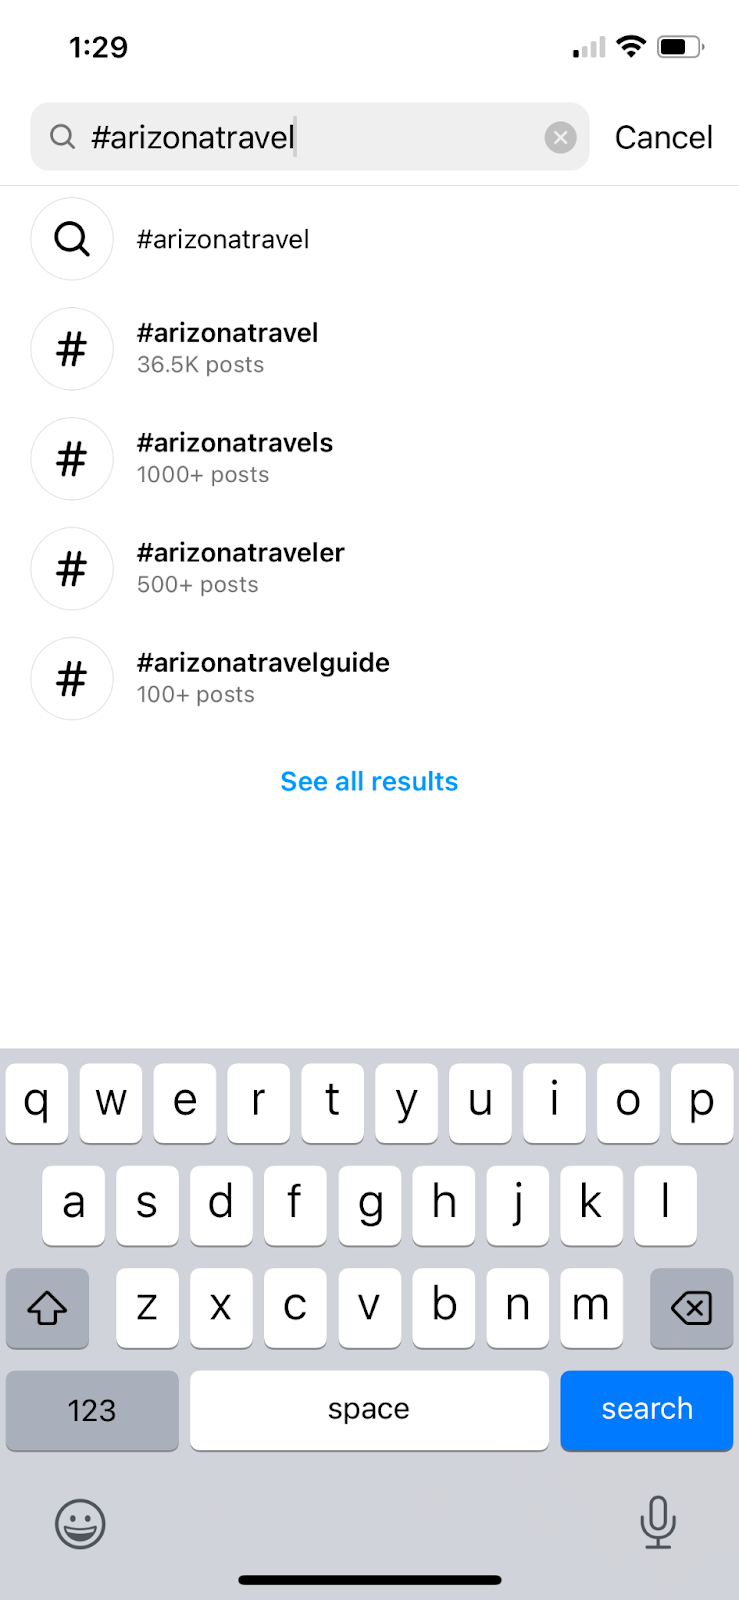 A screenshot of the search bar on Instagram and YouTube with the keyword “Arizona travel” in the search bar.